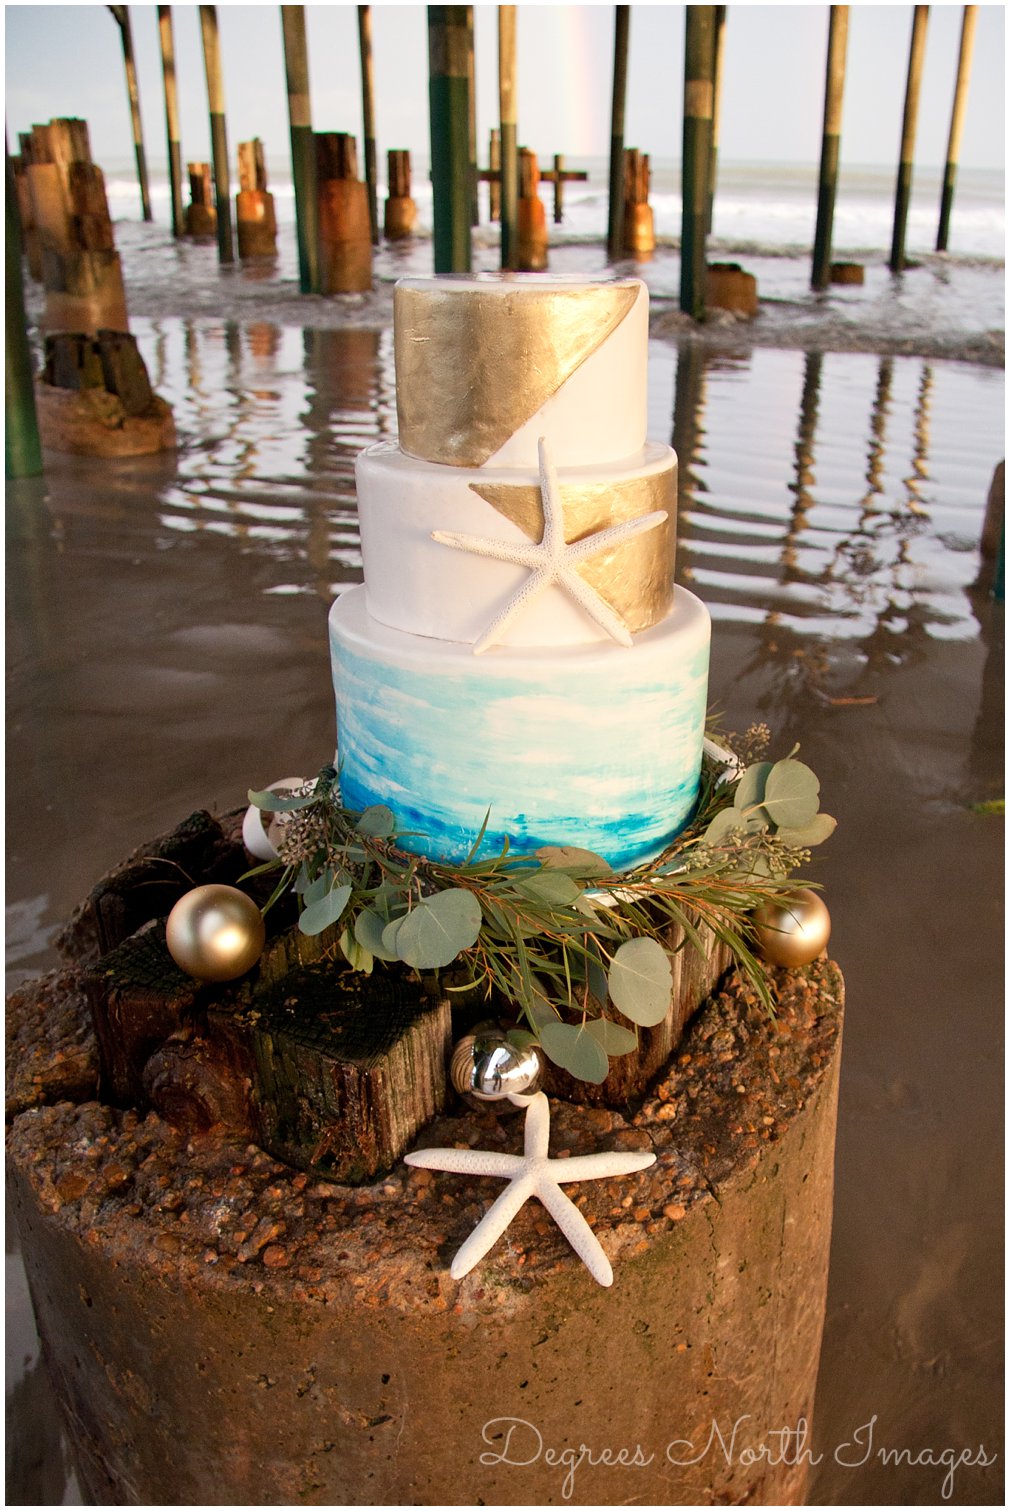 Aqua, gold and white 3-tier round wedding cake with starfish and ornaments